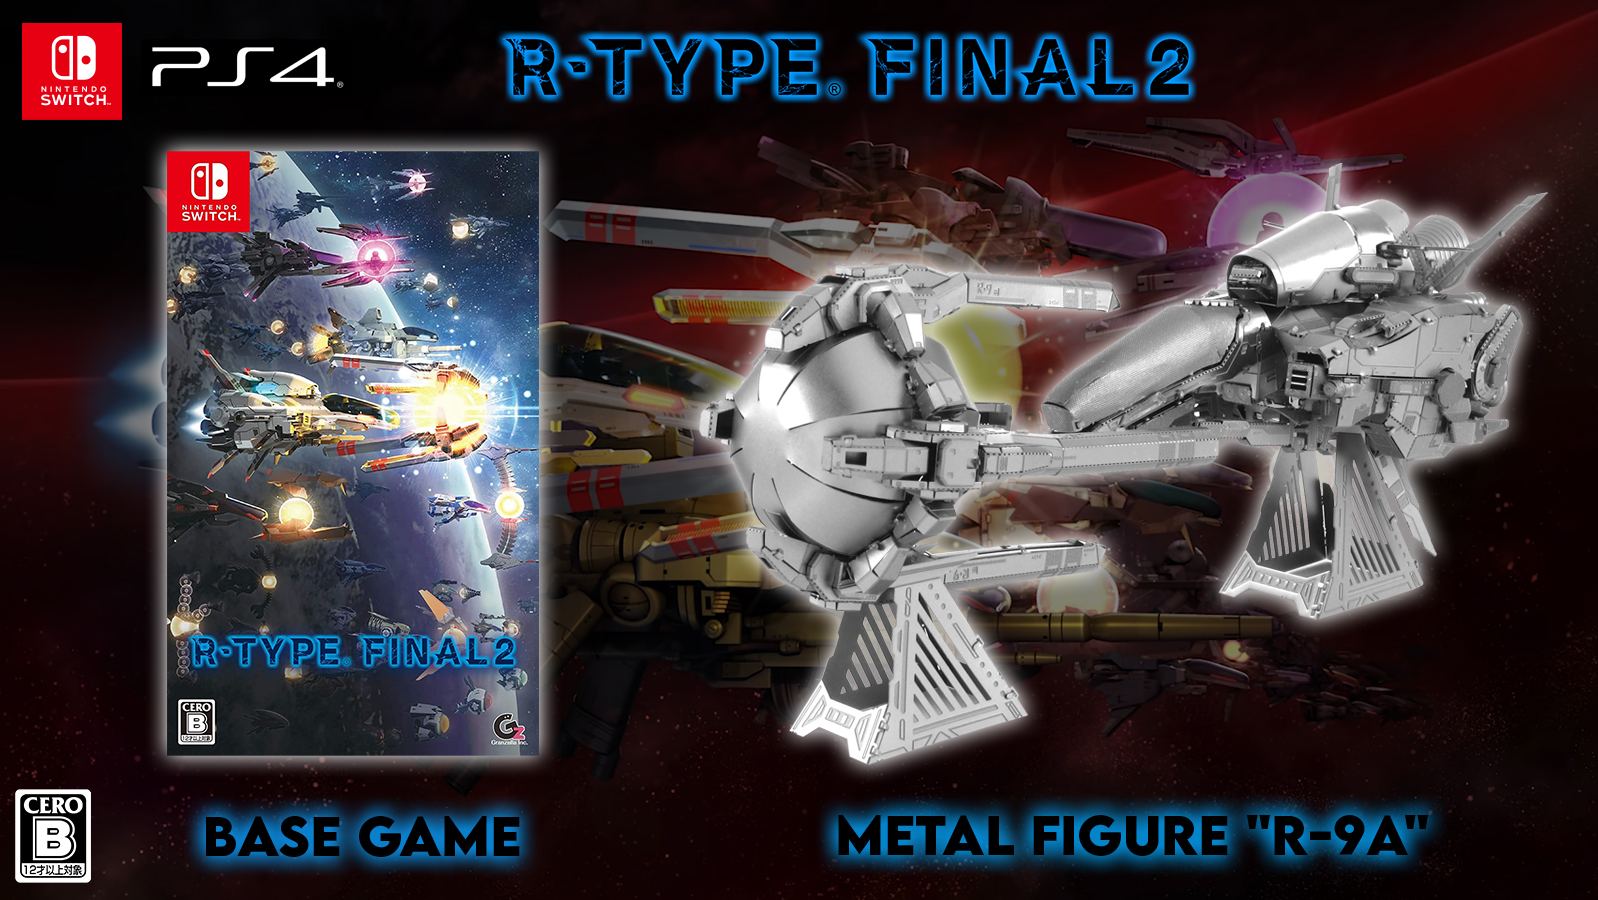 R-Type Final 2 [Limited Edition] (English)